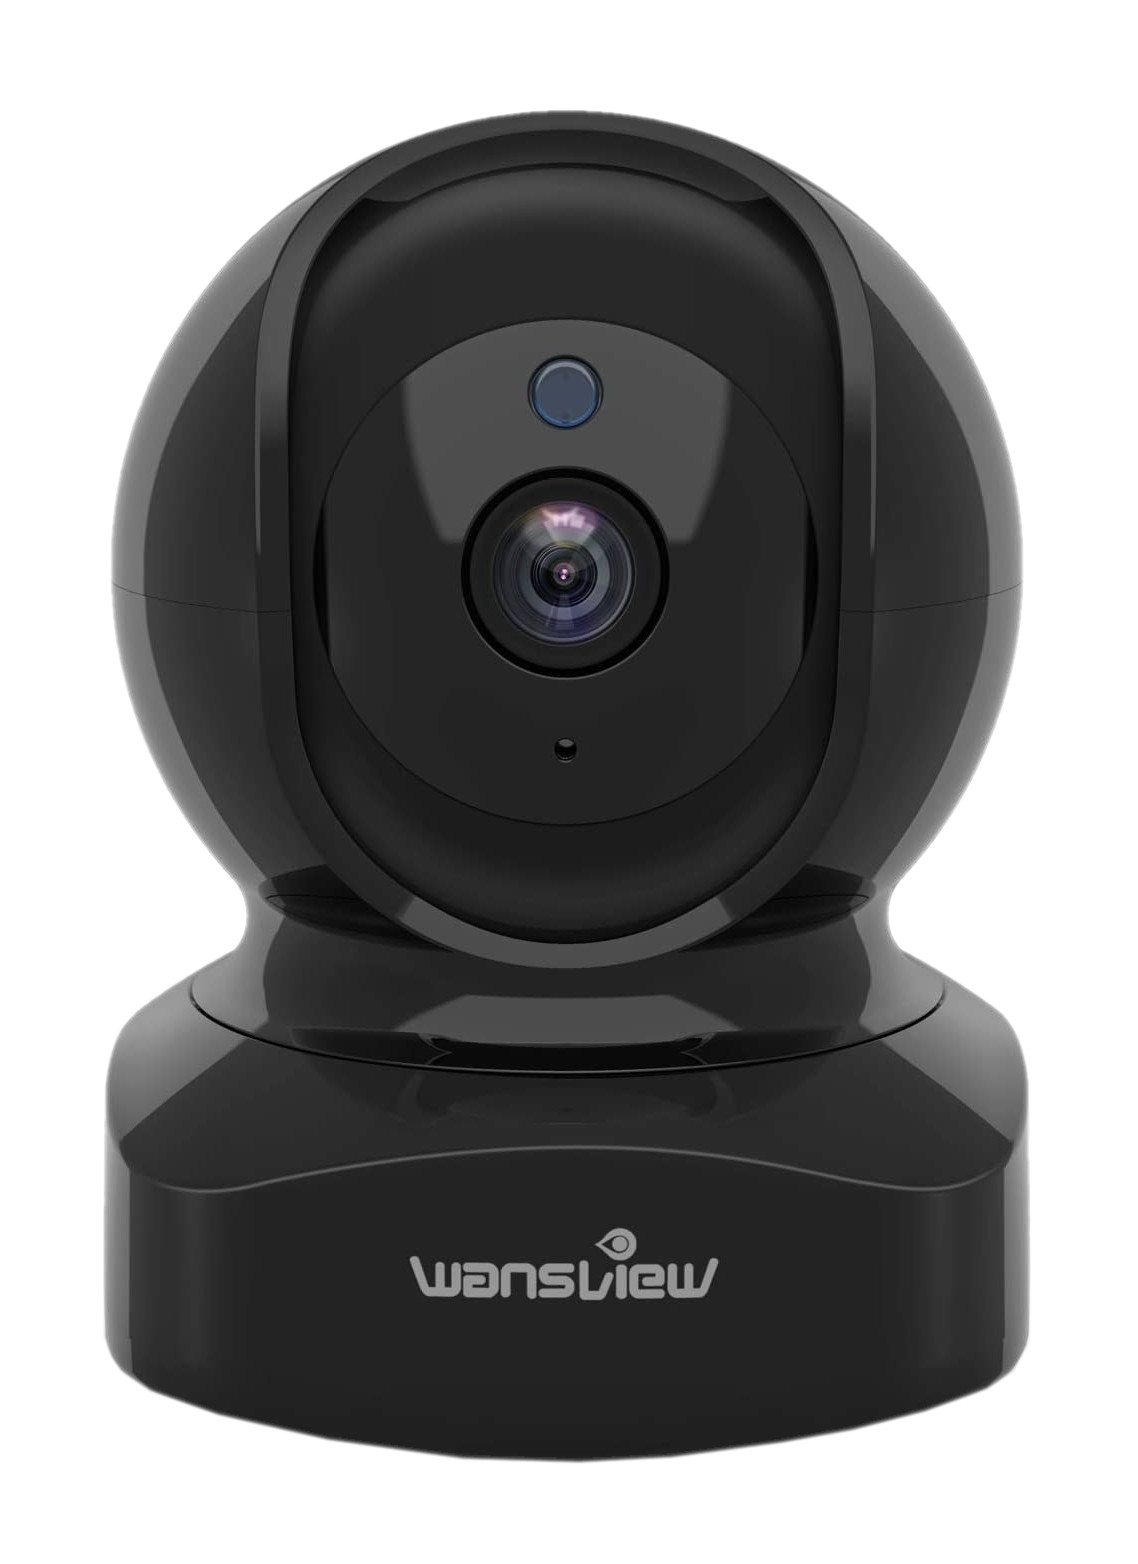 Wansview Wireless Security Camera IP 1080P HD WiFi Home Indoor 2 Way Audio Night Vision Q5-B